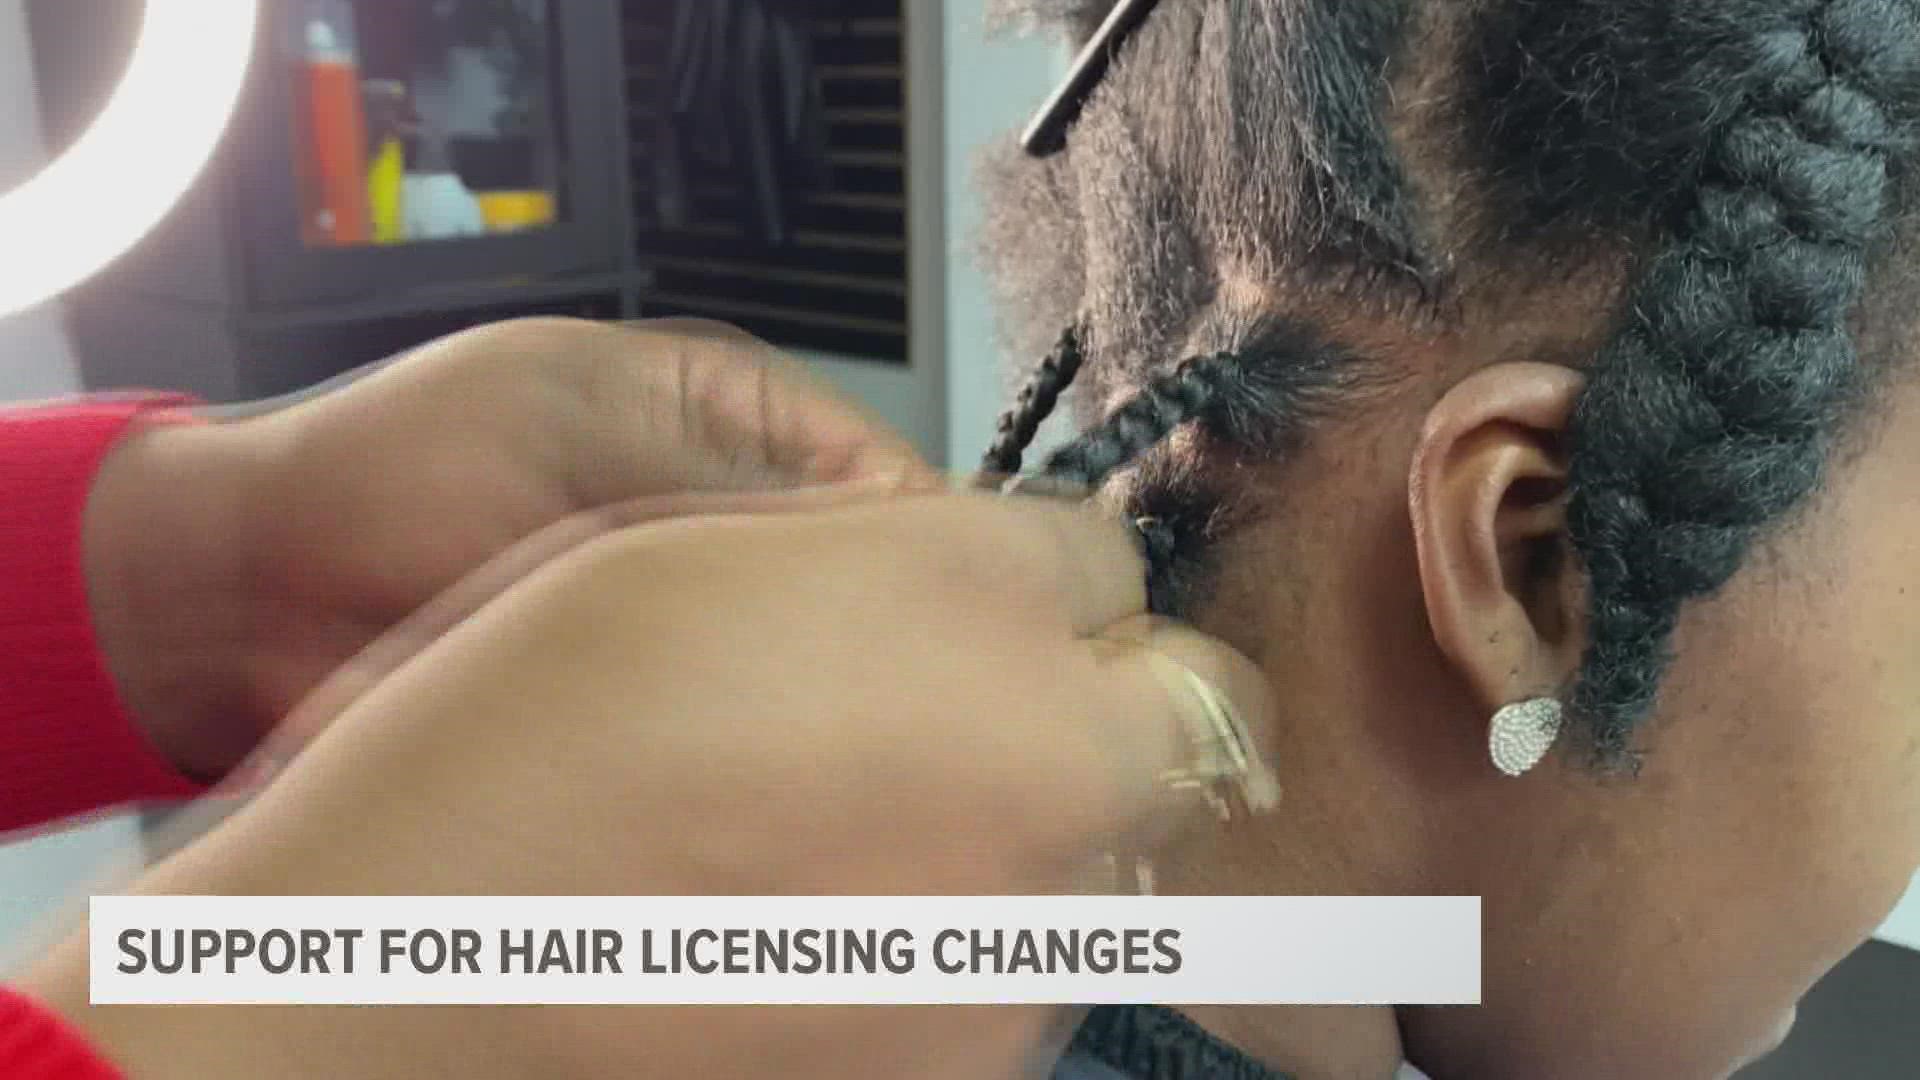 According to the Michigan Department of Licensing and Regulatory Affairs, "allowing natural hair culturists to wash hair would take legislative action to change."